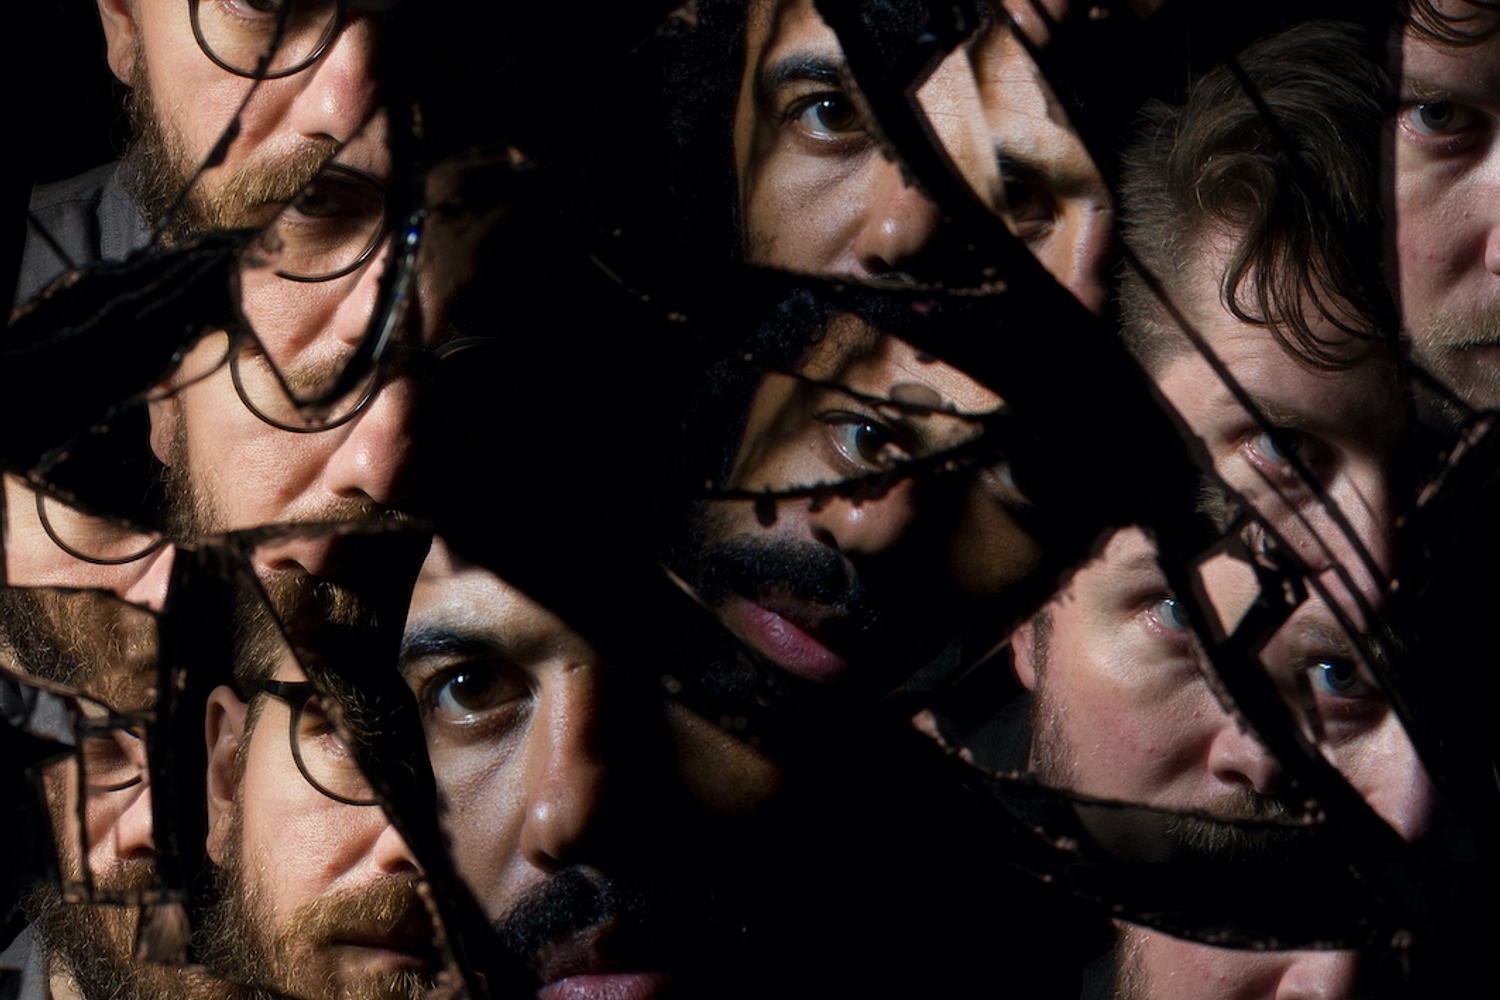 Clipping share ‘Visions of Bodies Being Burned: Enlacing & Pain Everyday’ video